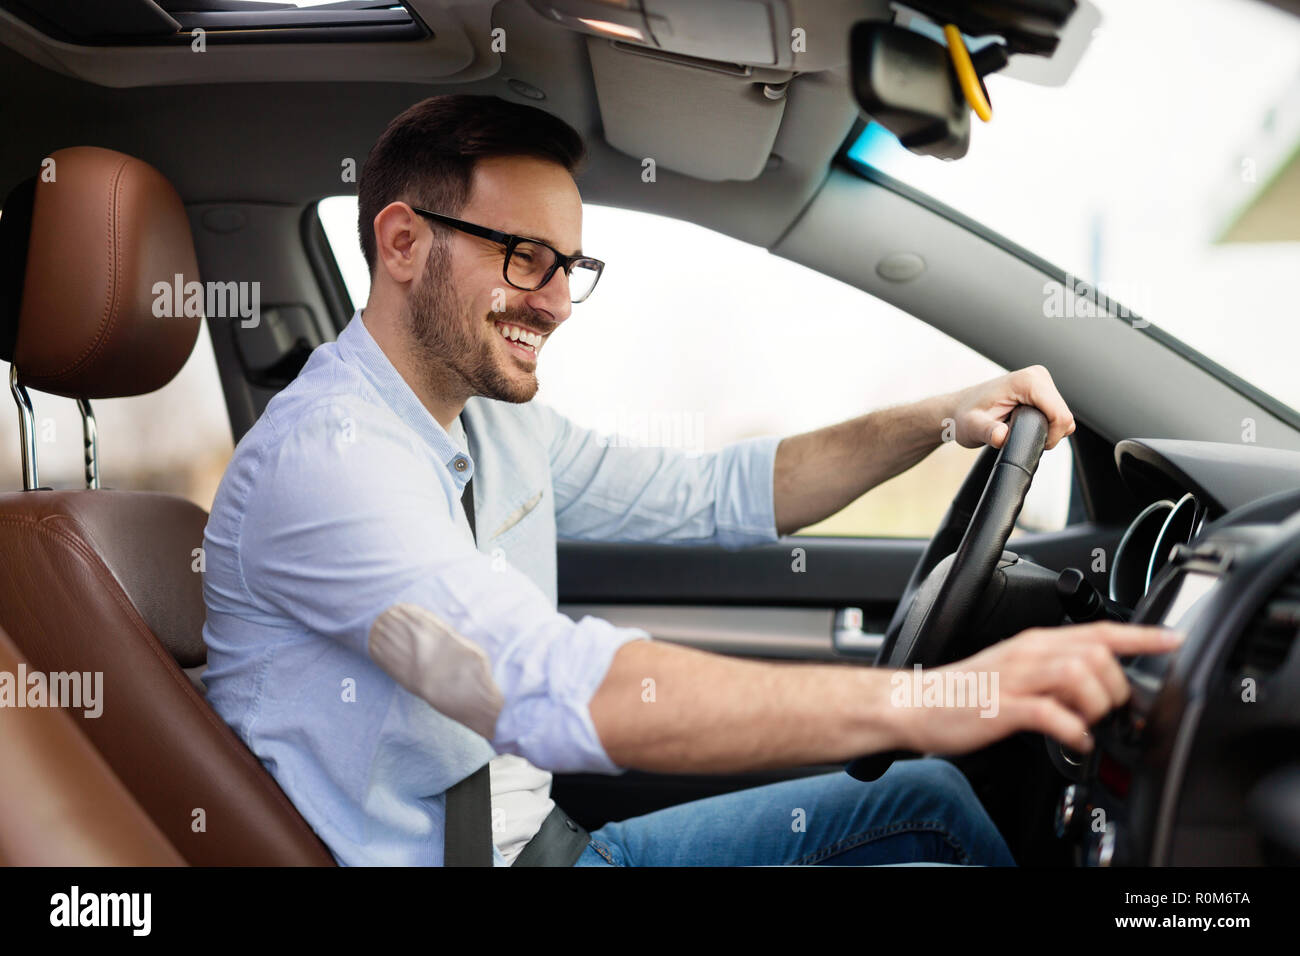 Man Using Gps Navigation System In Car to travel Stock Photo